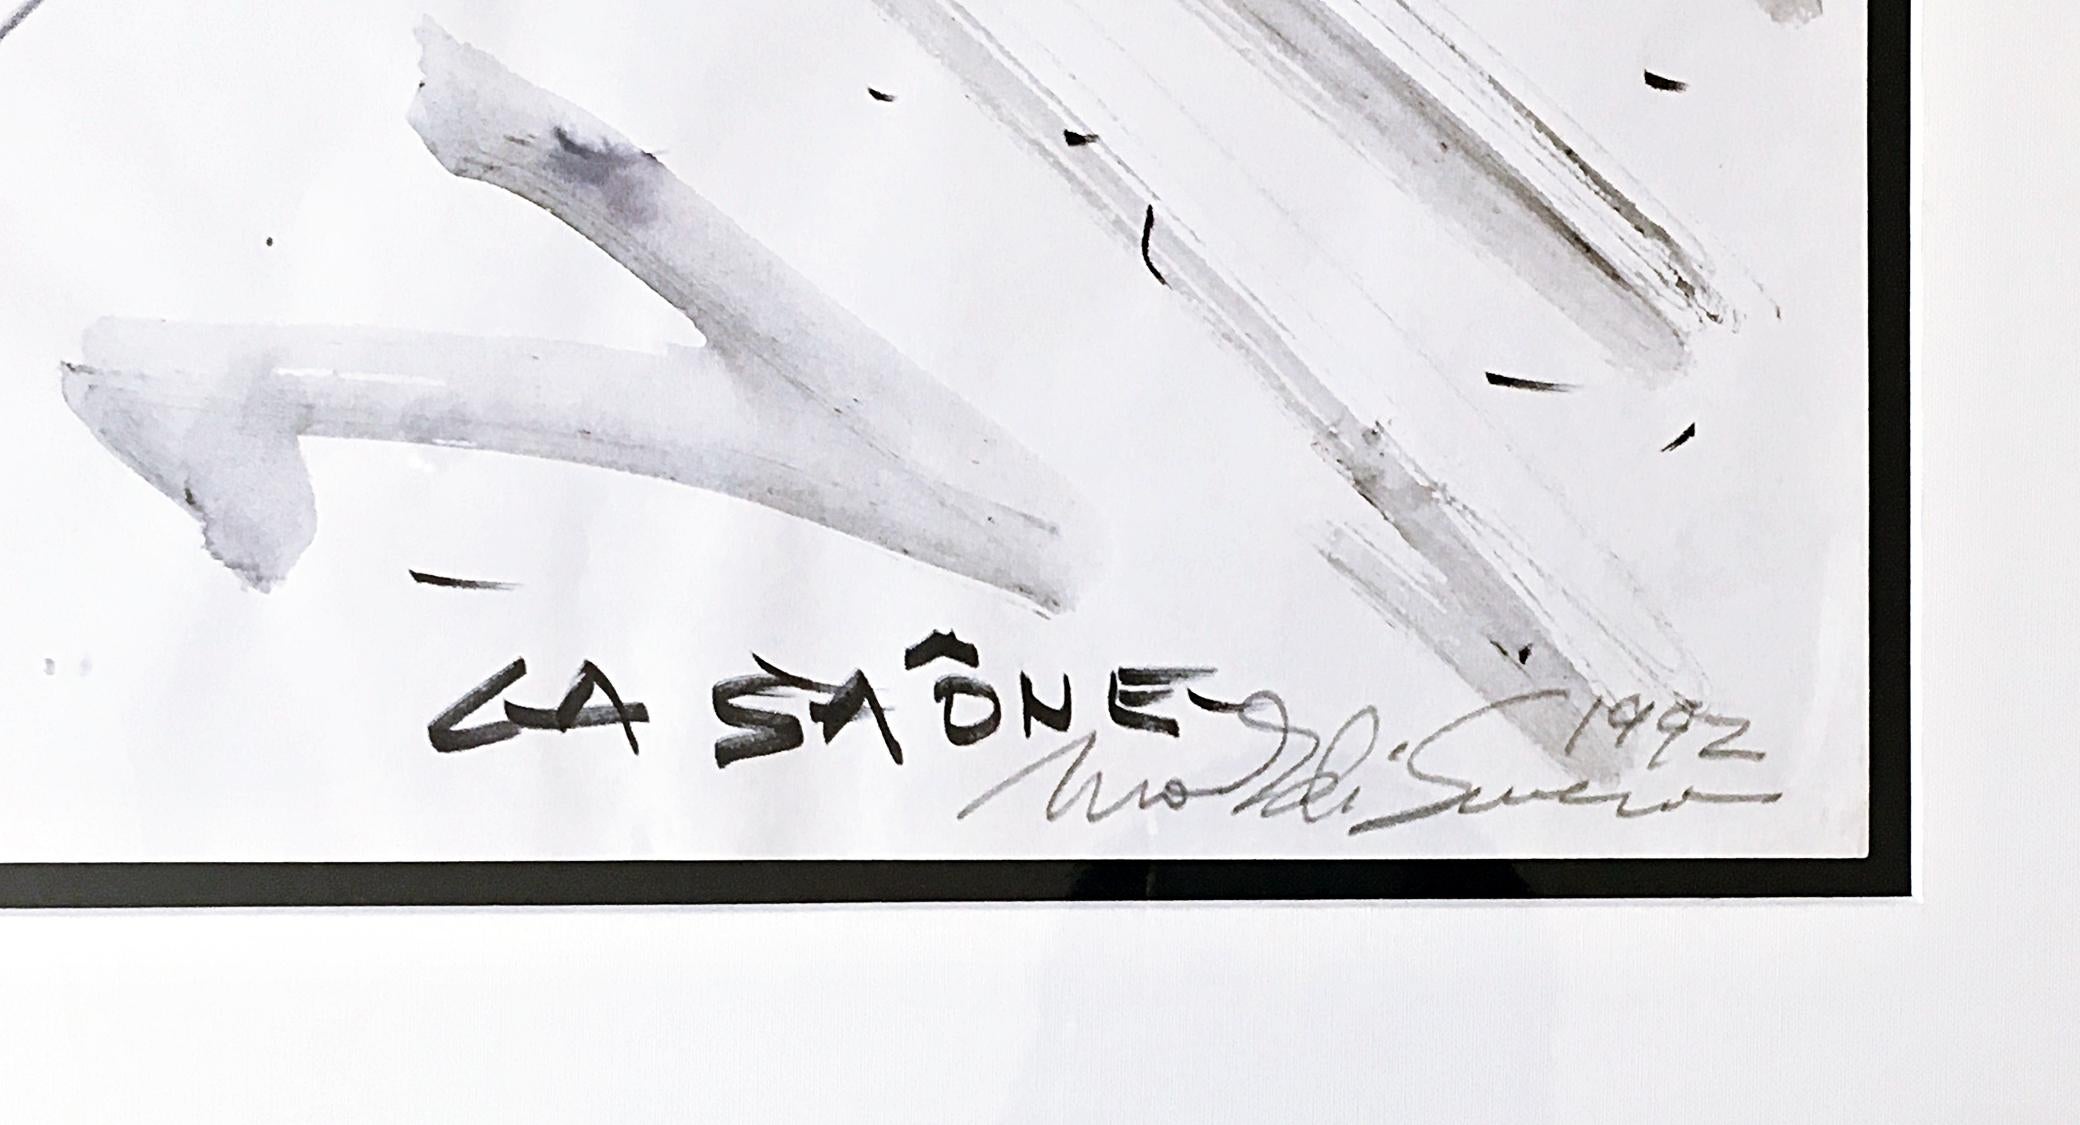 Mark di Suvero
Project for Sculpture in Chalon-sur-Saône, 1992
Marker, Watercolor and Ink Wash on Paper.
Hand signed and dated by artist on lower right front
Frame included
The rare signed watercolor by Mark di Suvero was a sculptural proposal